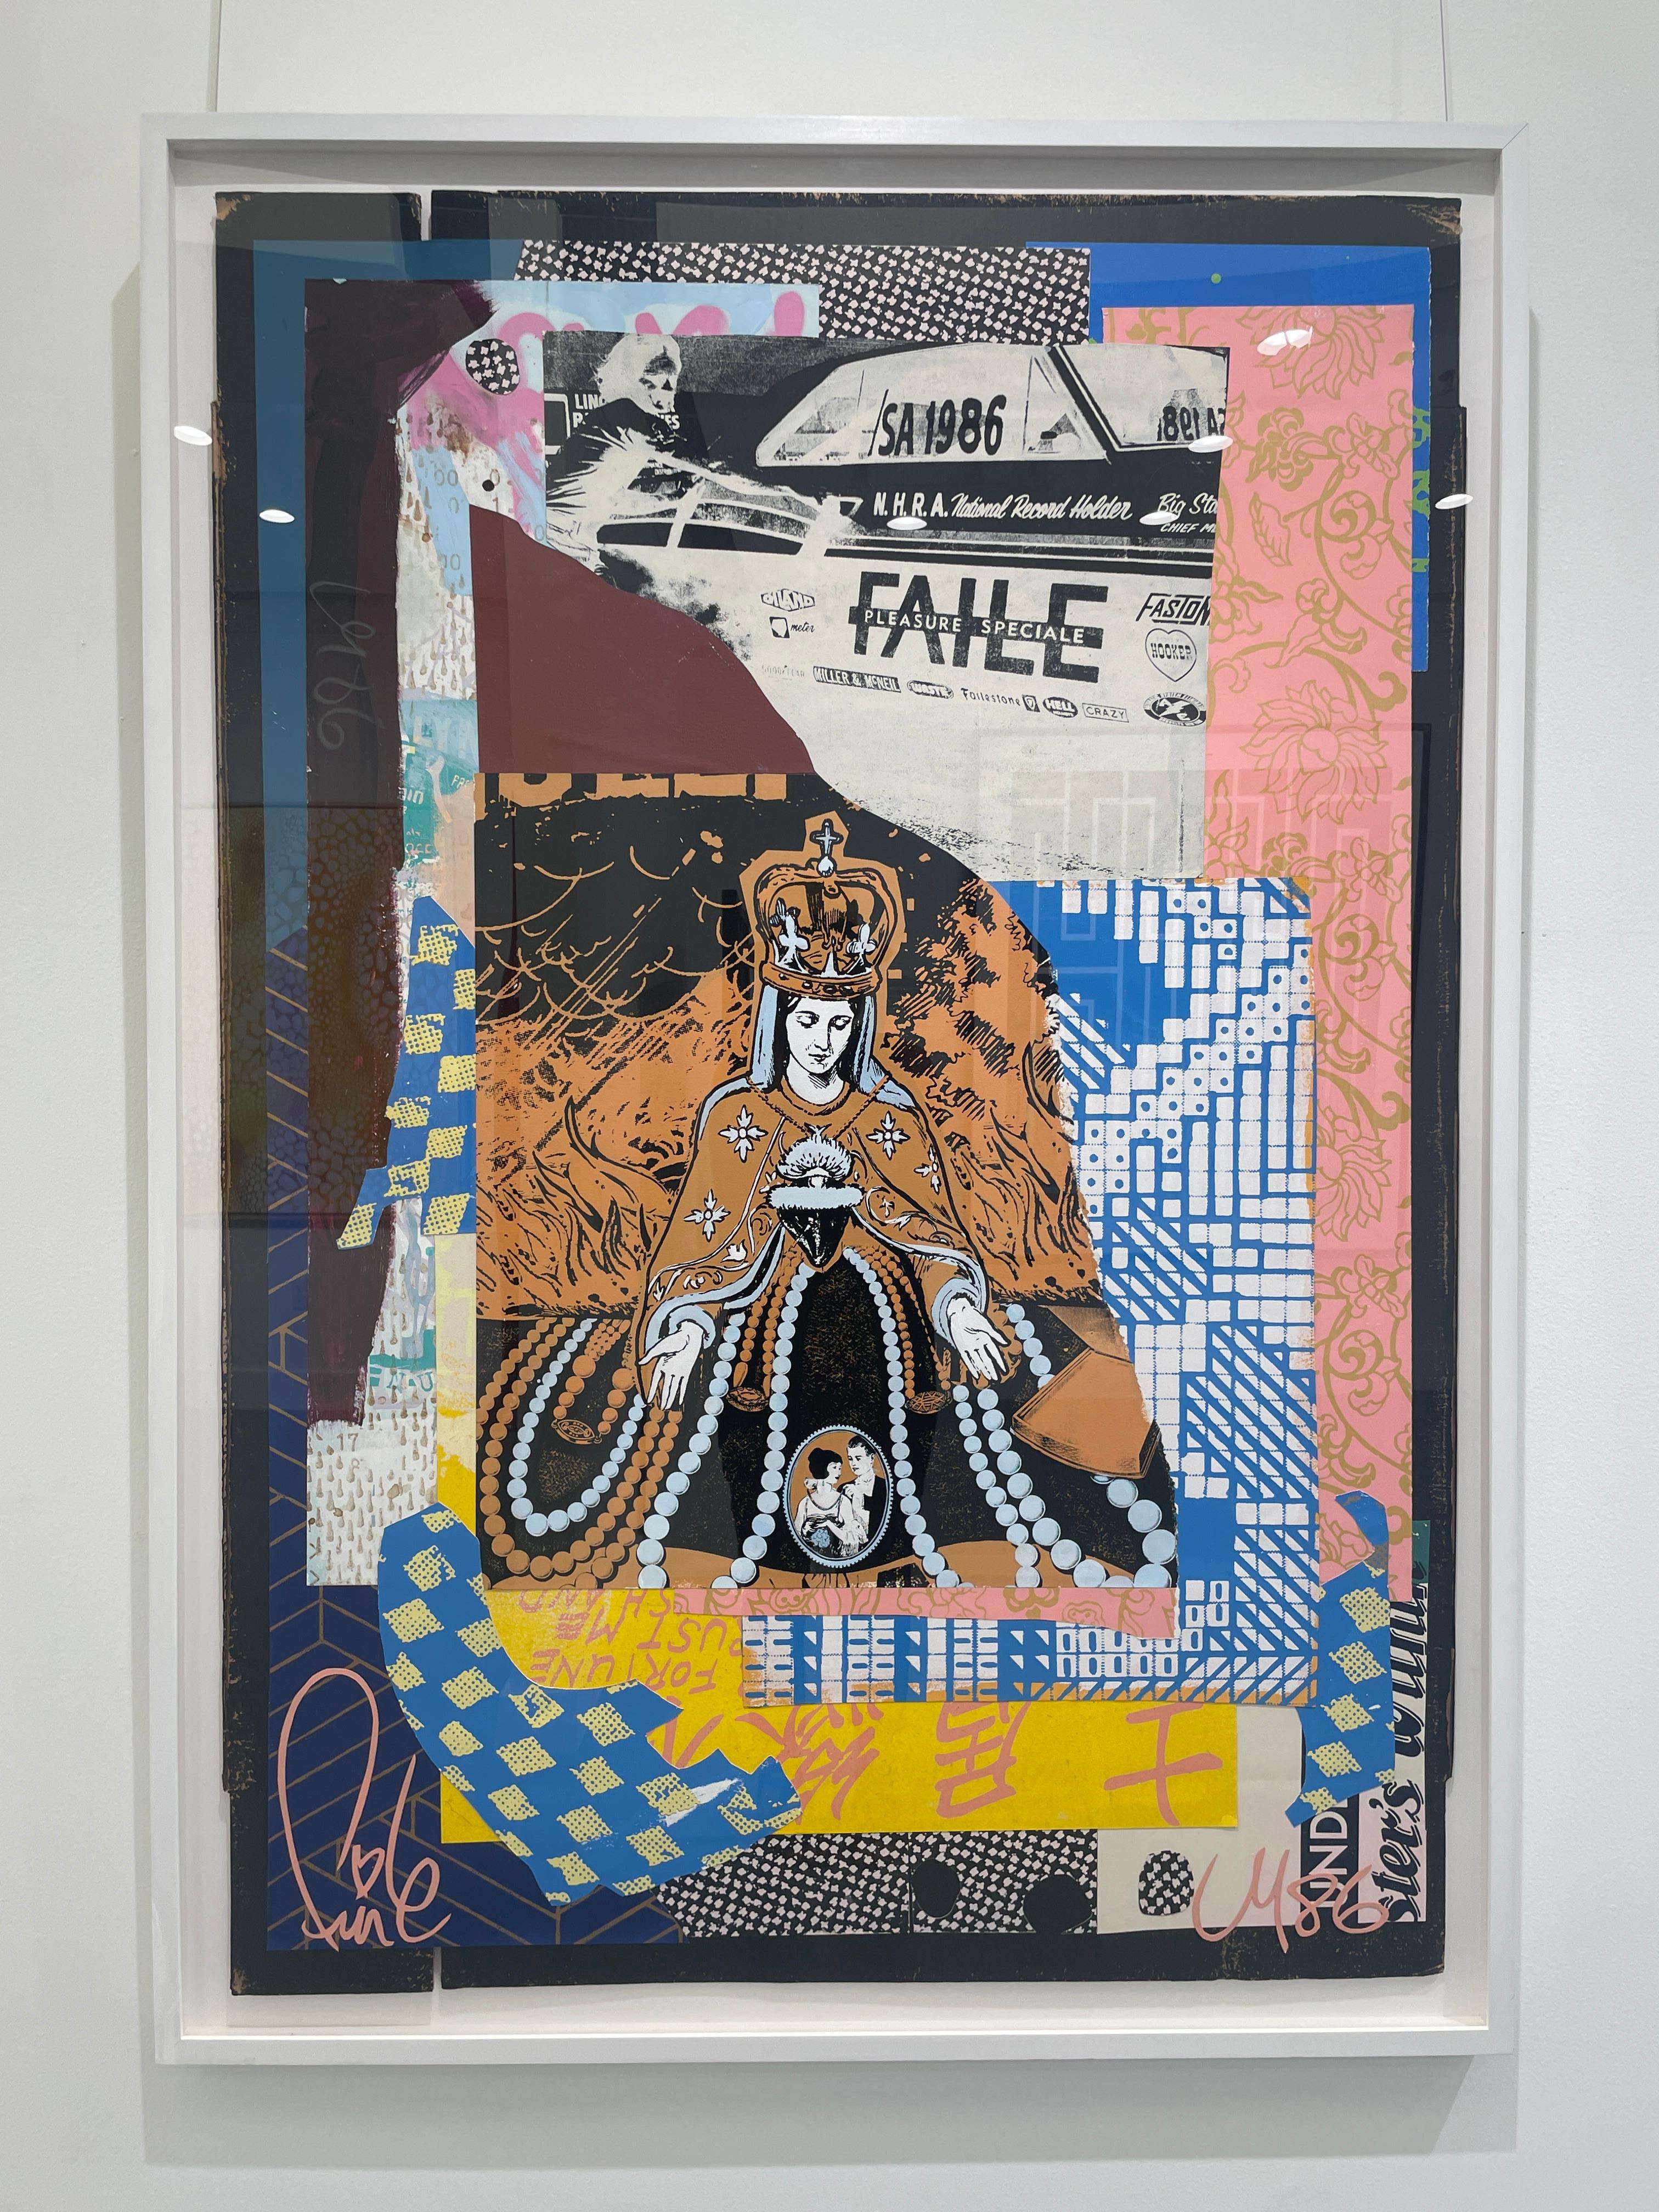 Speciale - Painting by Faile